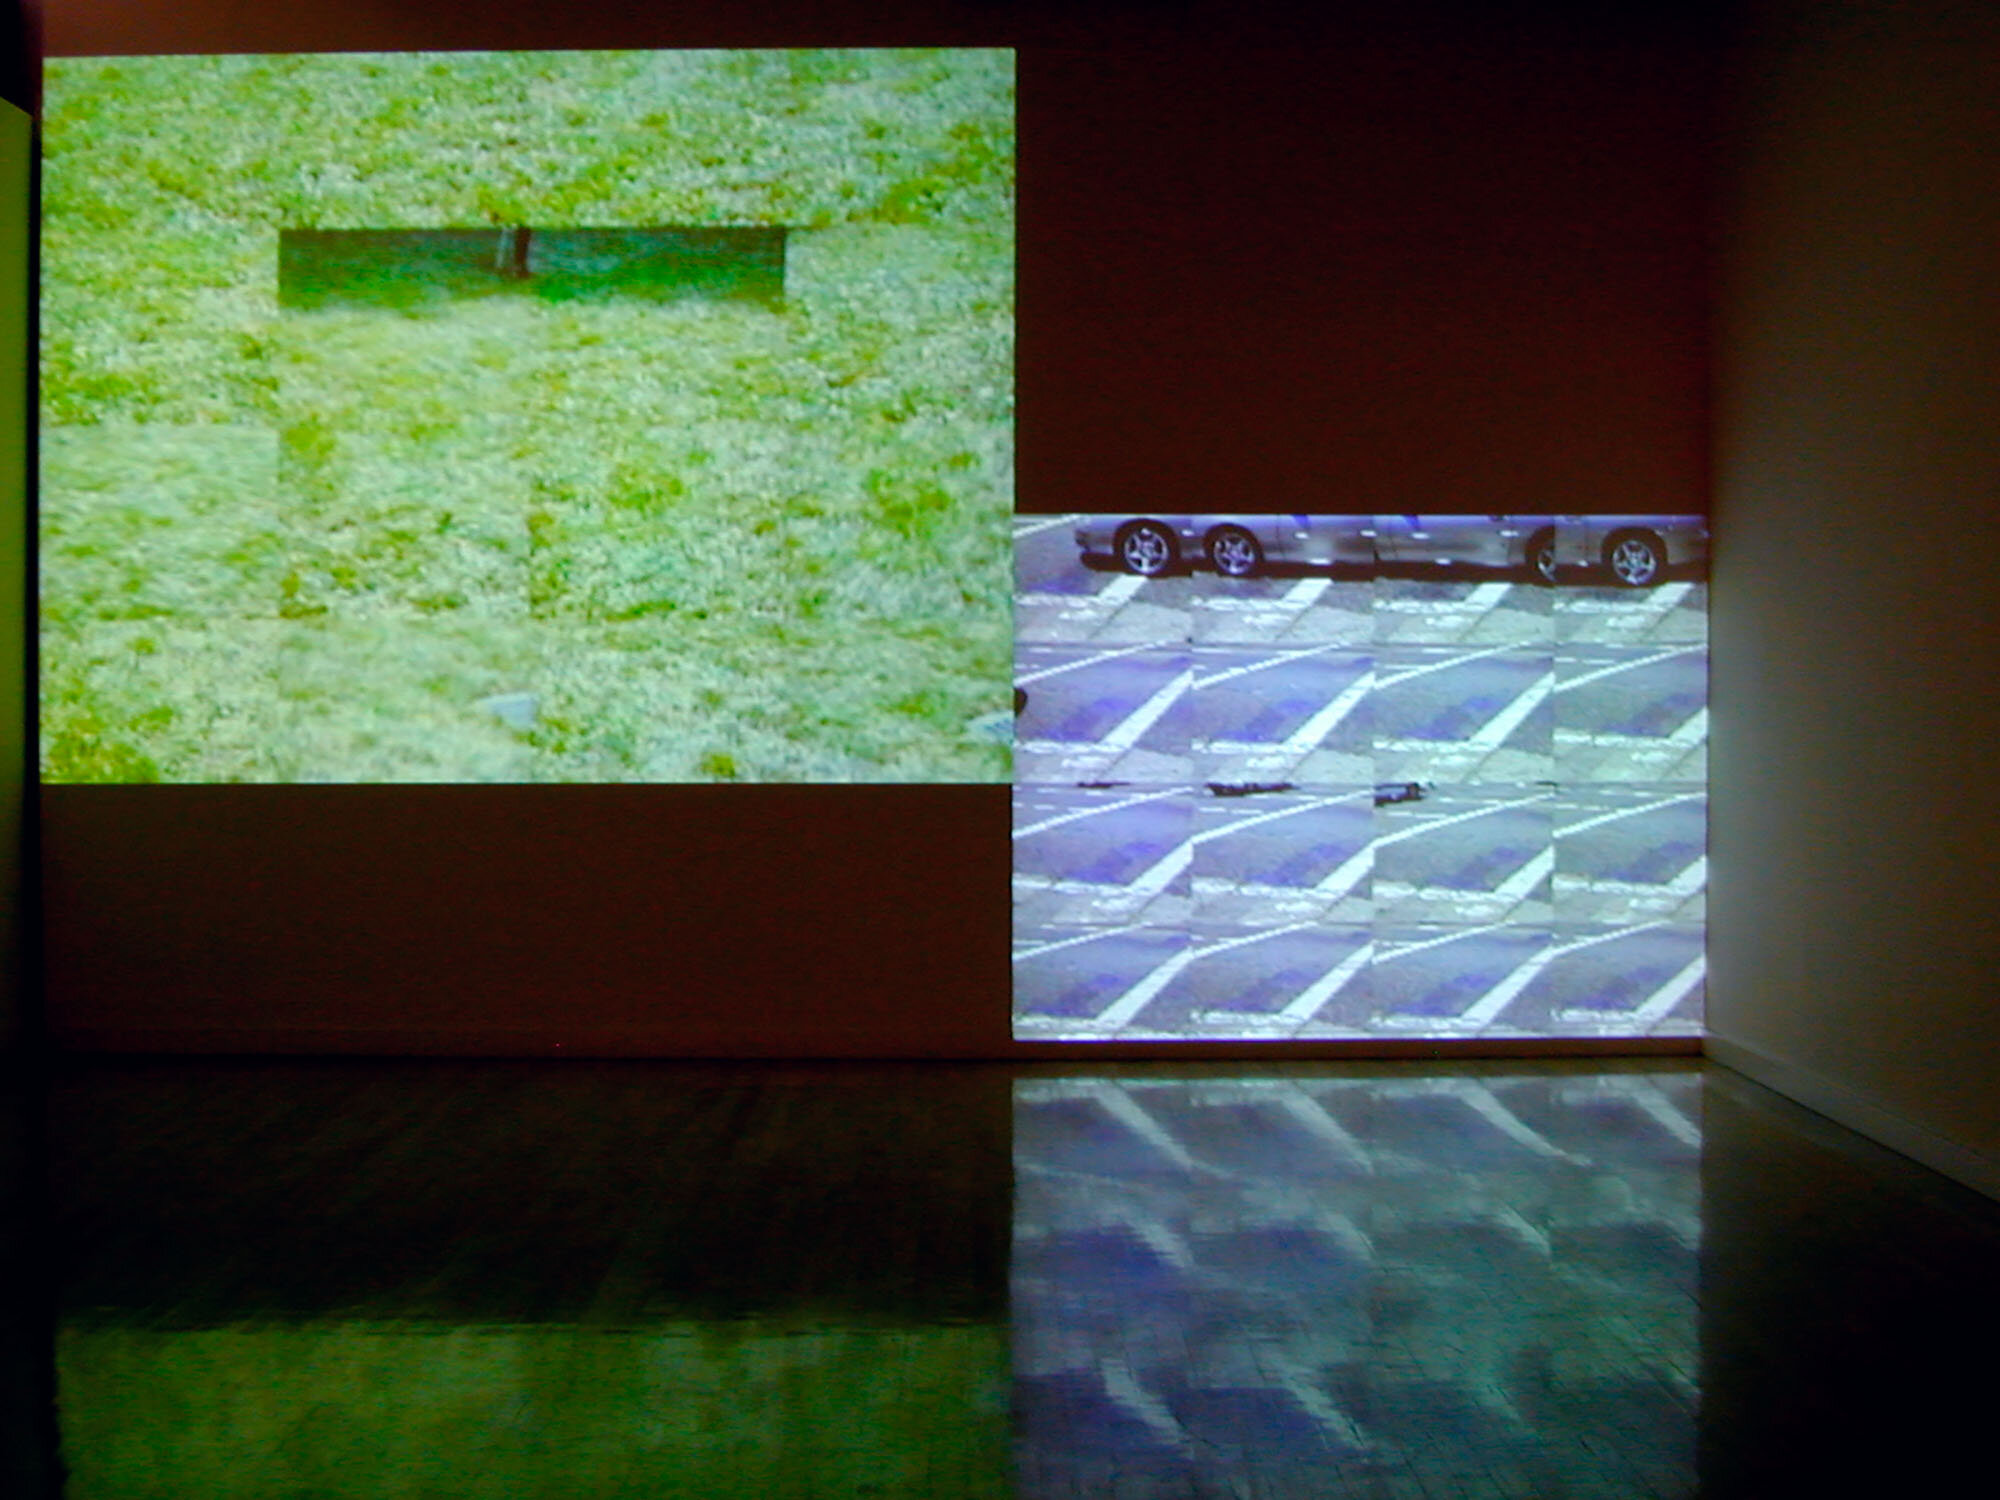   Fields , 2001, 45-minute two channel movie projection, silent, 216 x 131 inches   